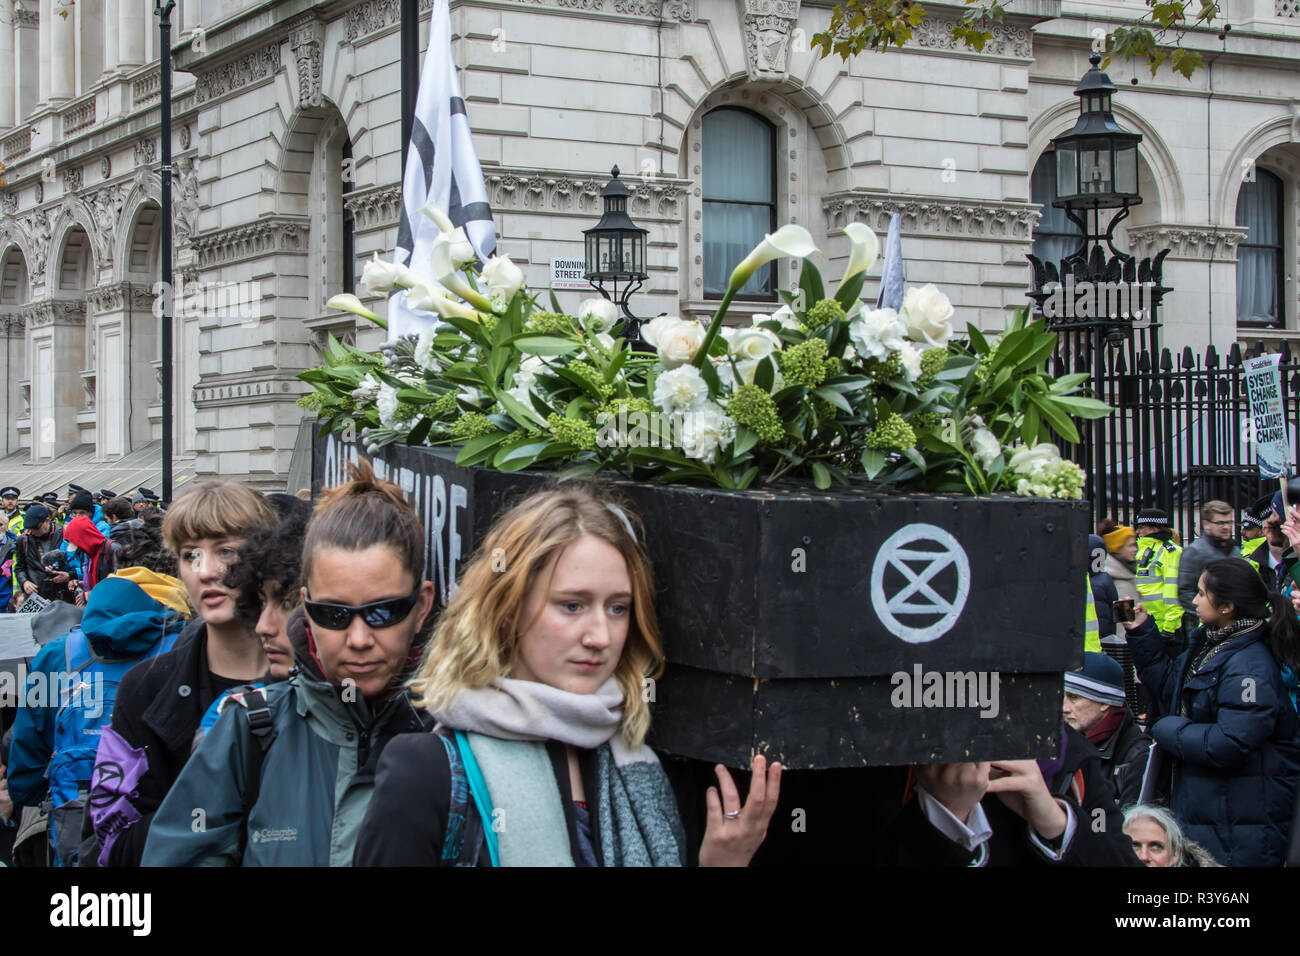 London, UK. 24th Nov 2018. 24 November, 2018. London,UK. 'Extinction Rebellion' climate protesters demonstrated in central London with a funeral procession which included a sit down outside Downing Street and a march to Buckingham Palace. Credit: David Rowe/Alamy Live News Stock Photo